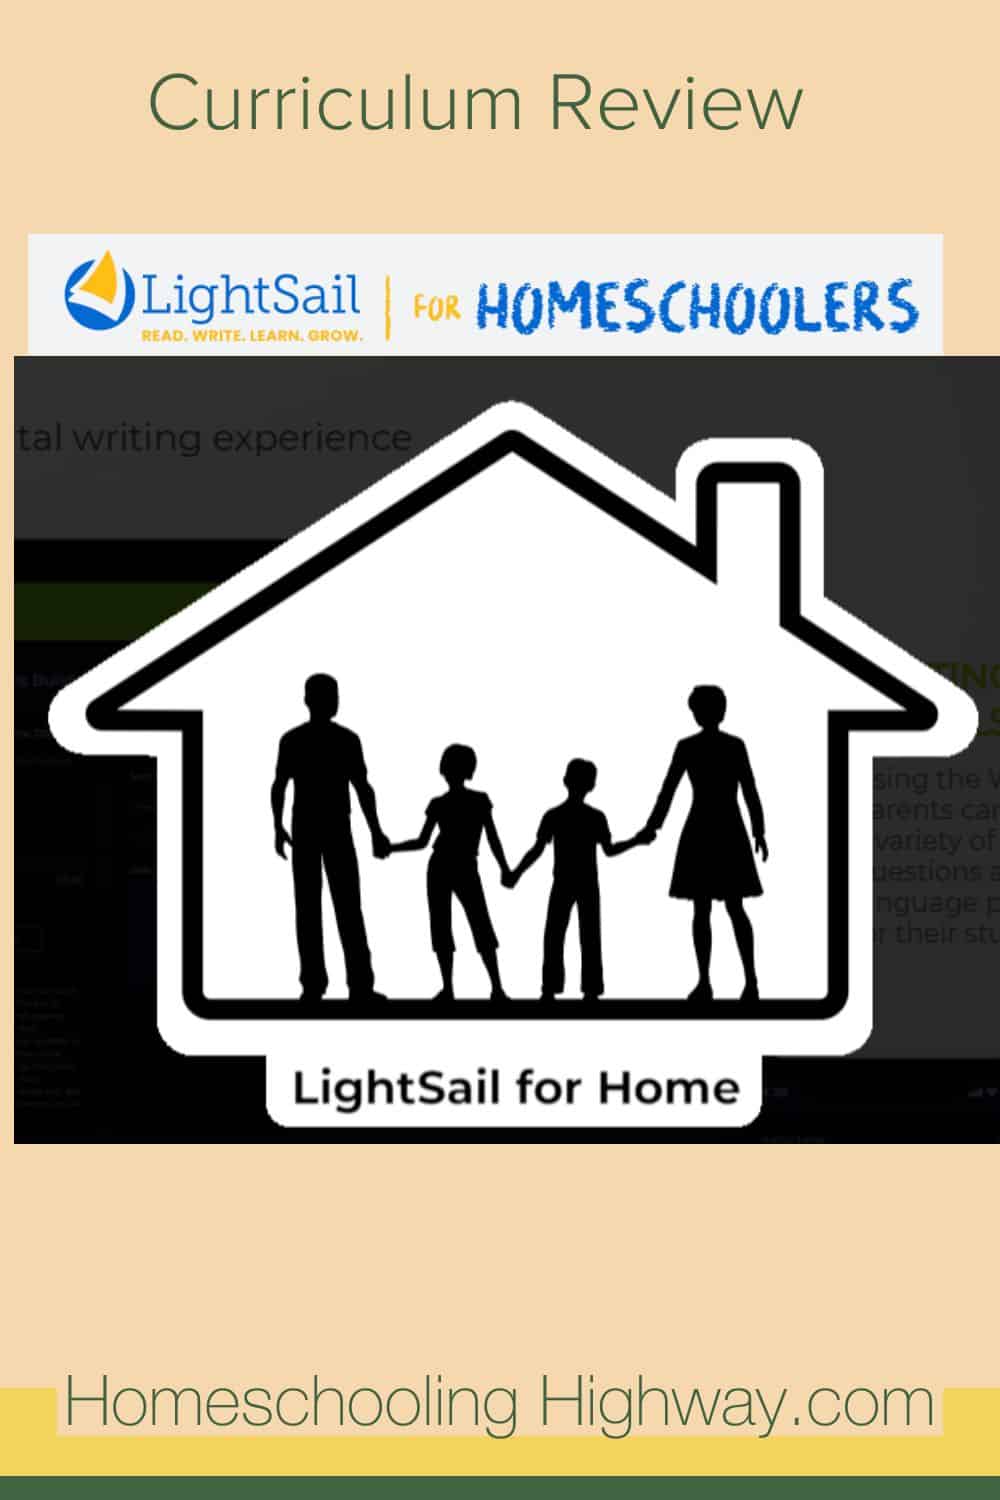 LightSail curriculum review by Homeschooling Highway